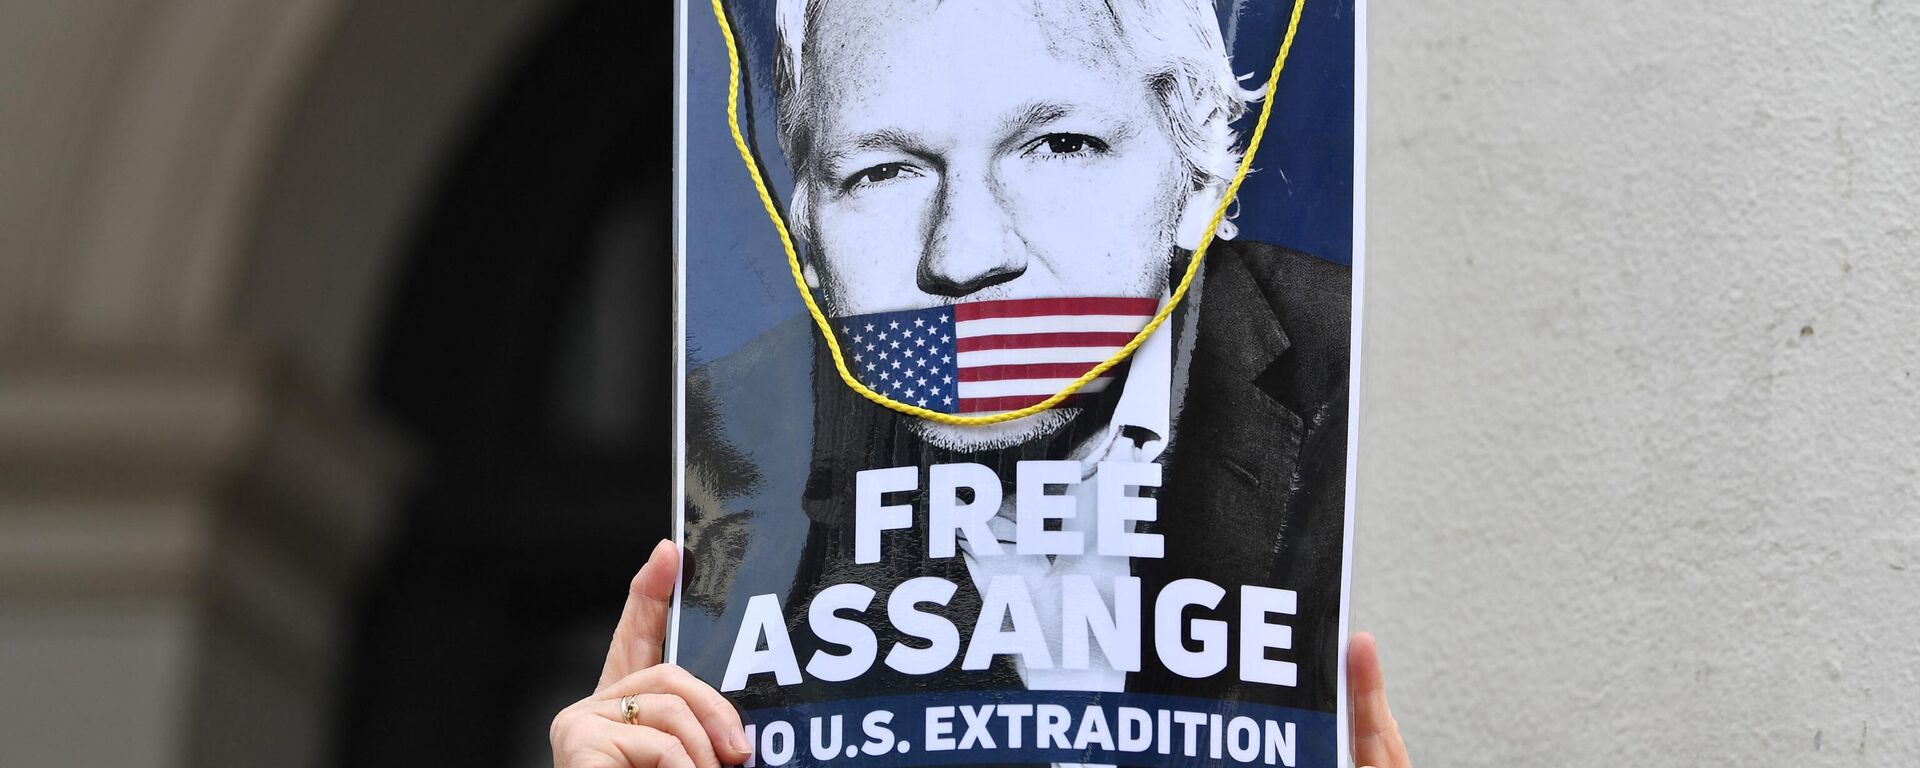 A woman takes part in a demonstration in support of Wikileaks founder Julian Assange who is facing extradition to the USA in Brussels on April 23, 2022 - Sputnik International, 1920, 03.05.2023